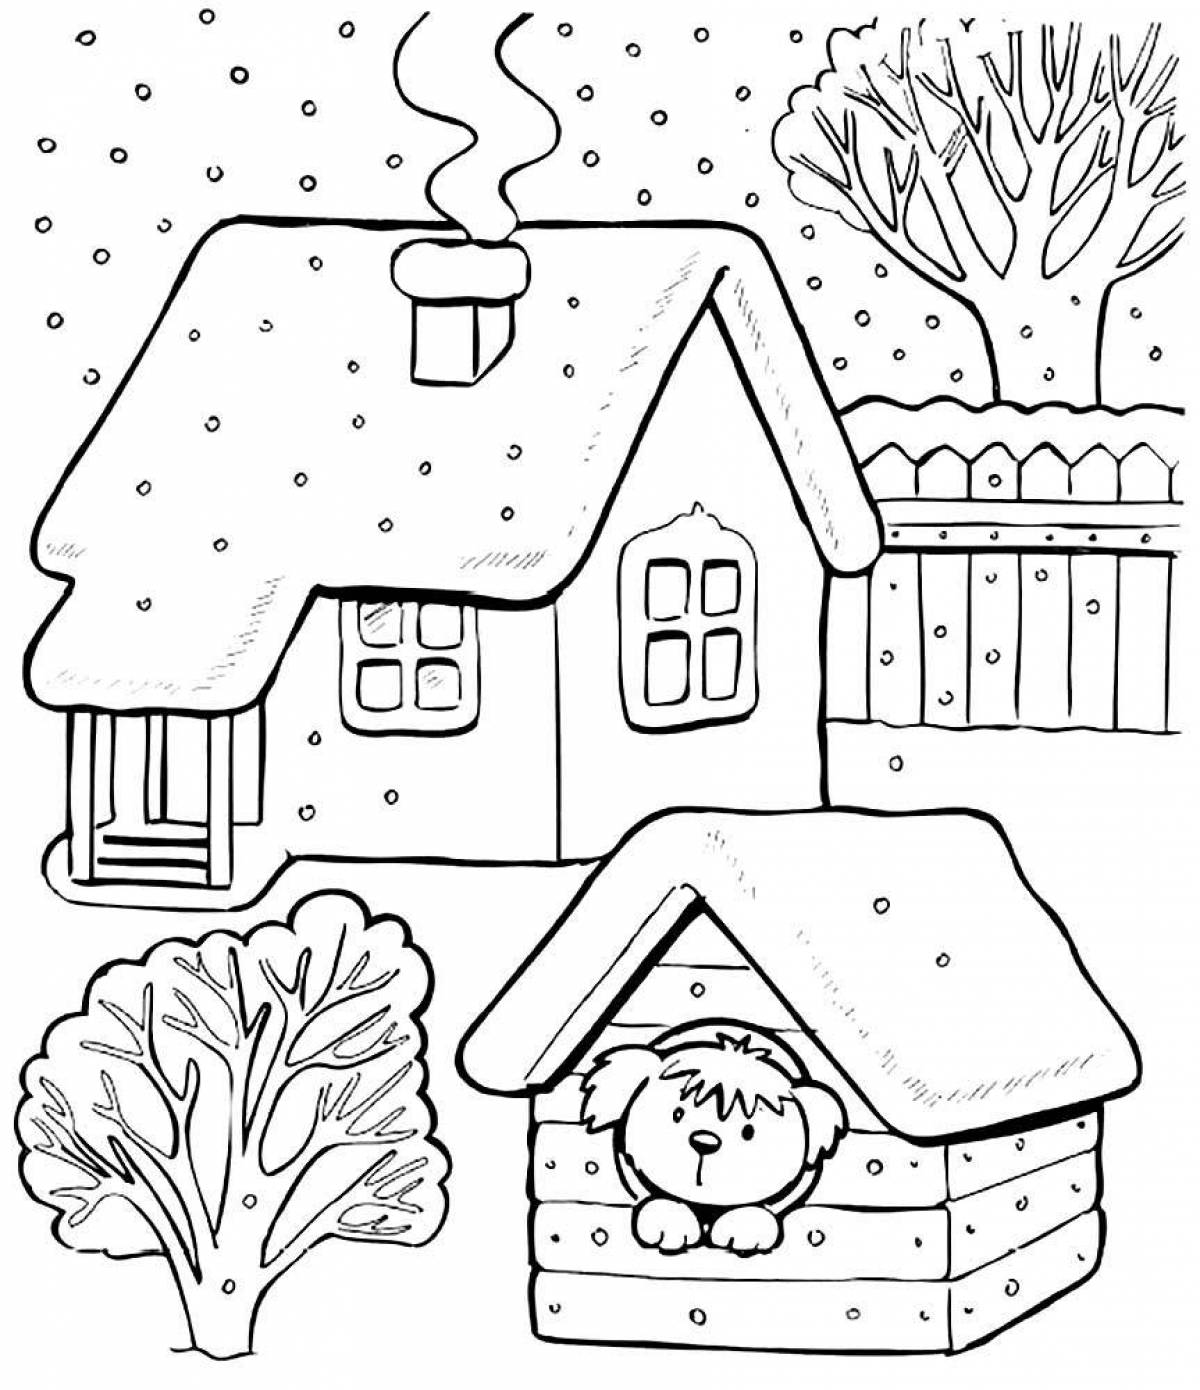 Festive winter coloring book for children 4-5 years old